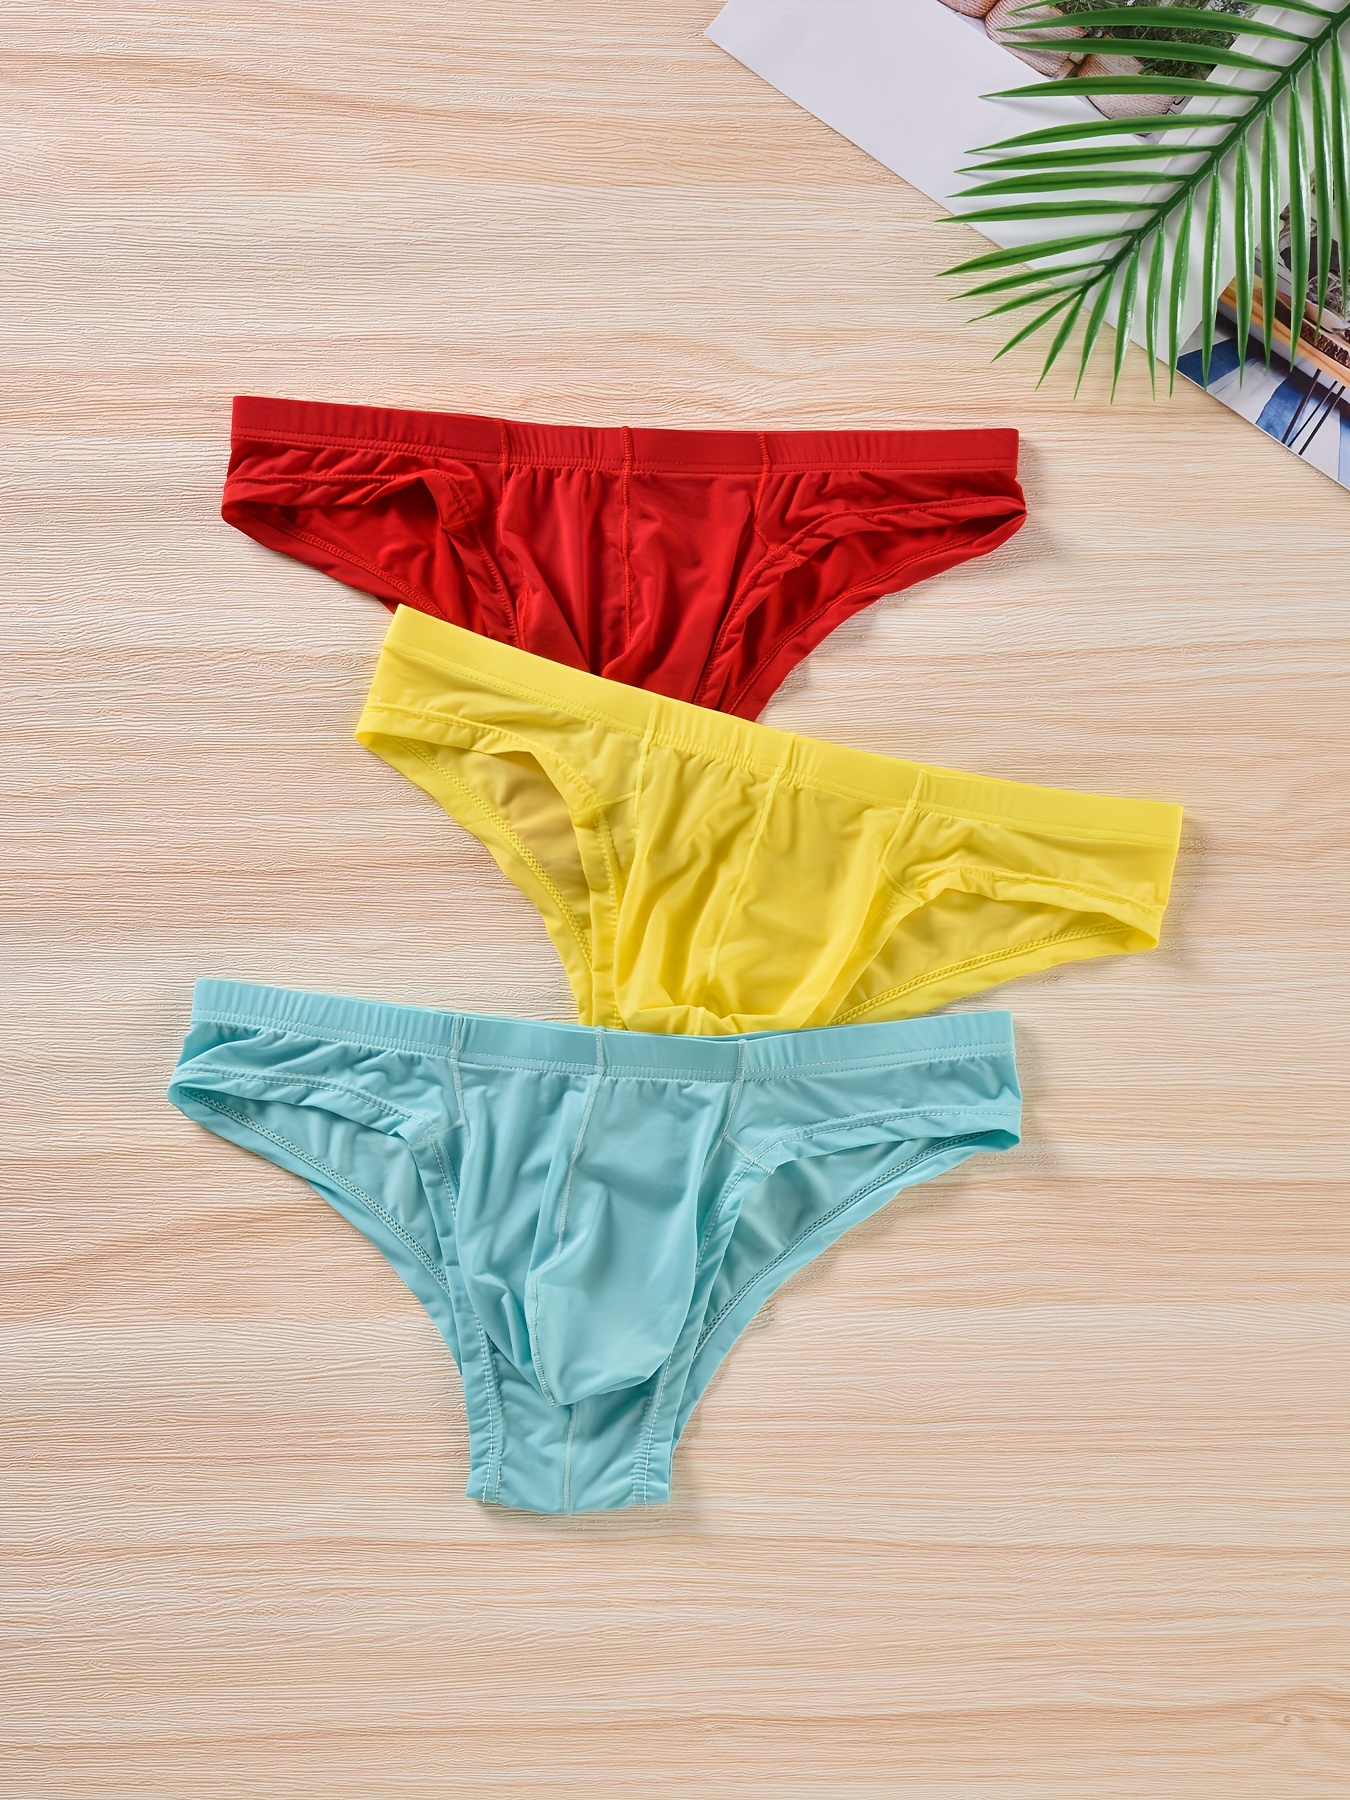 Sunnymall Men Panties Solid Color Smooth Stretch Seamless Glossy Underwear  Sexy One-Piece Underpants Briefs Male Clothes